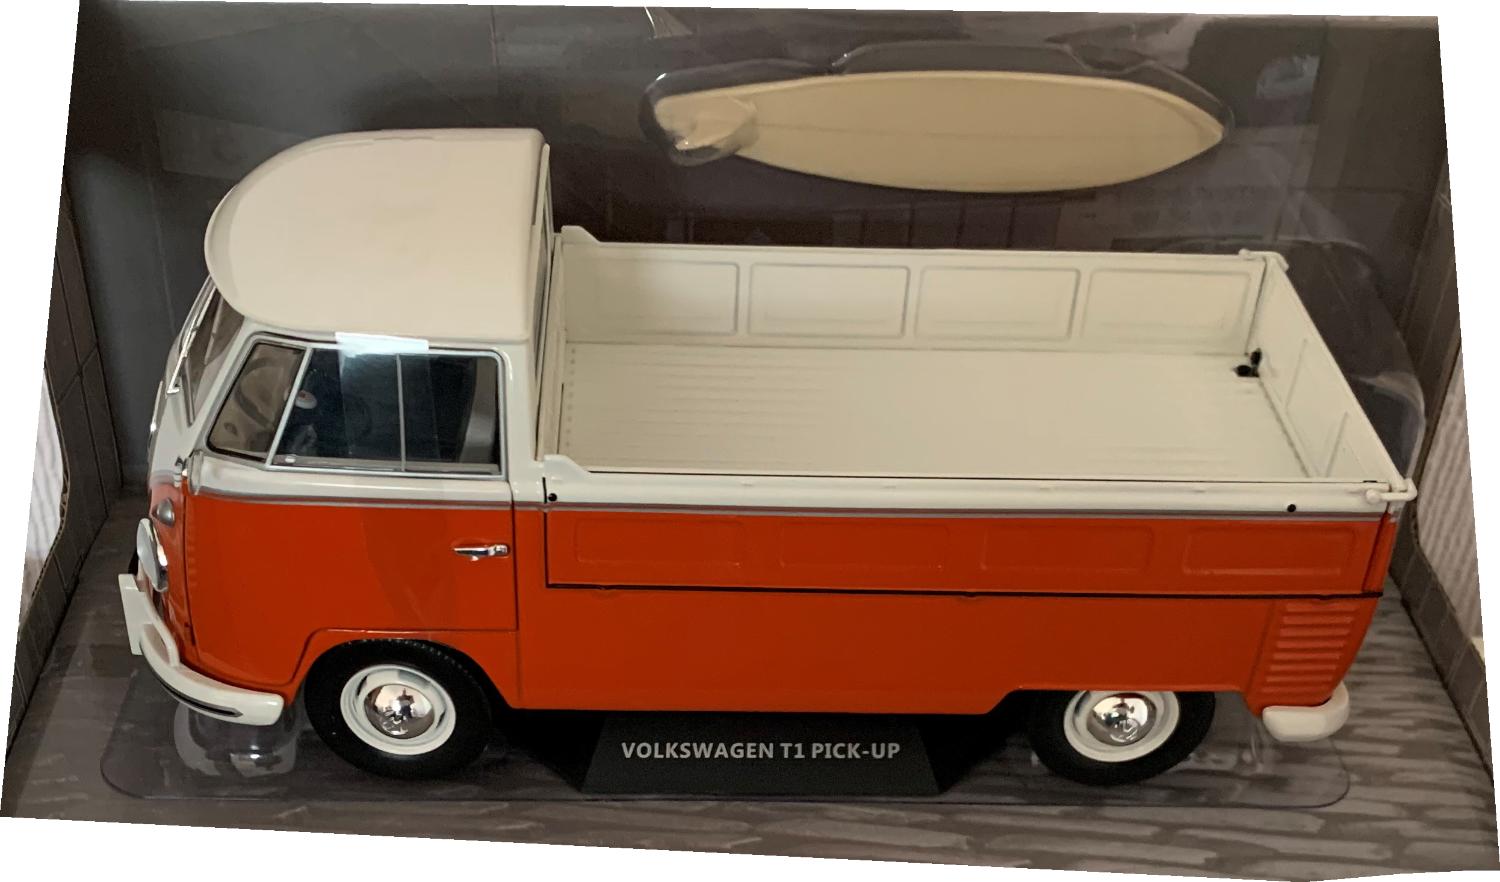 An excellent scale model of the VW T1 Pickup with high level of detail throughout, all authentically recreated.  Model is presented in a window display box.